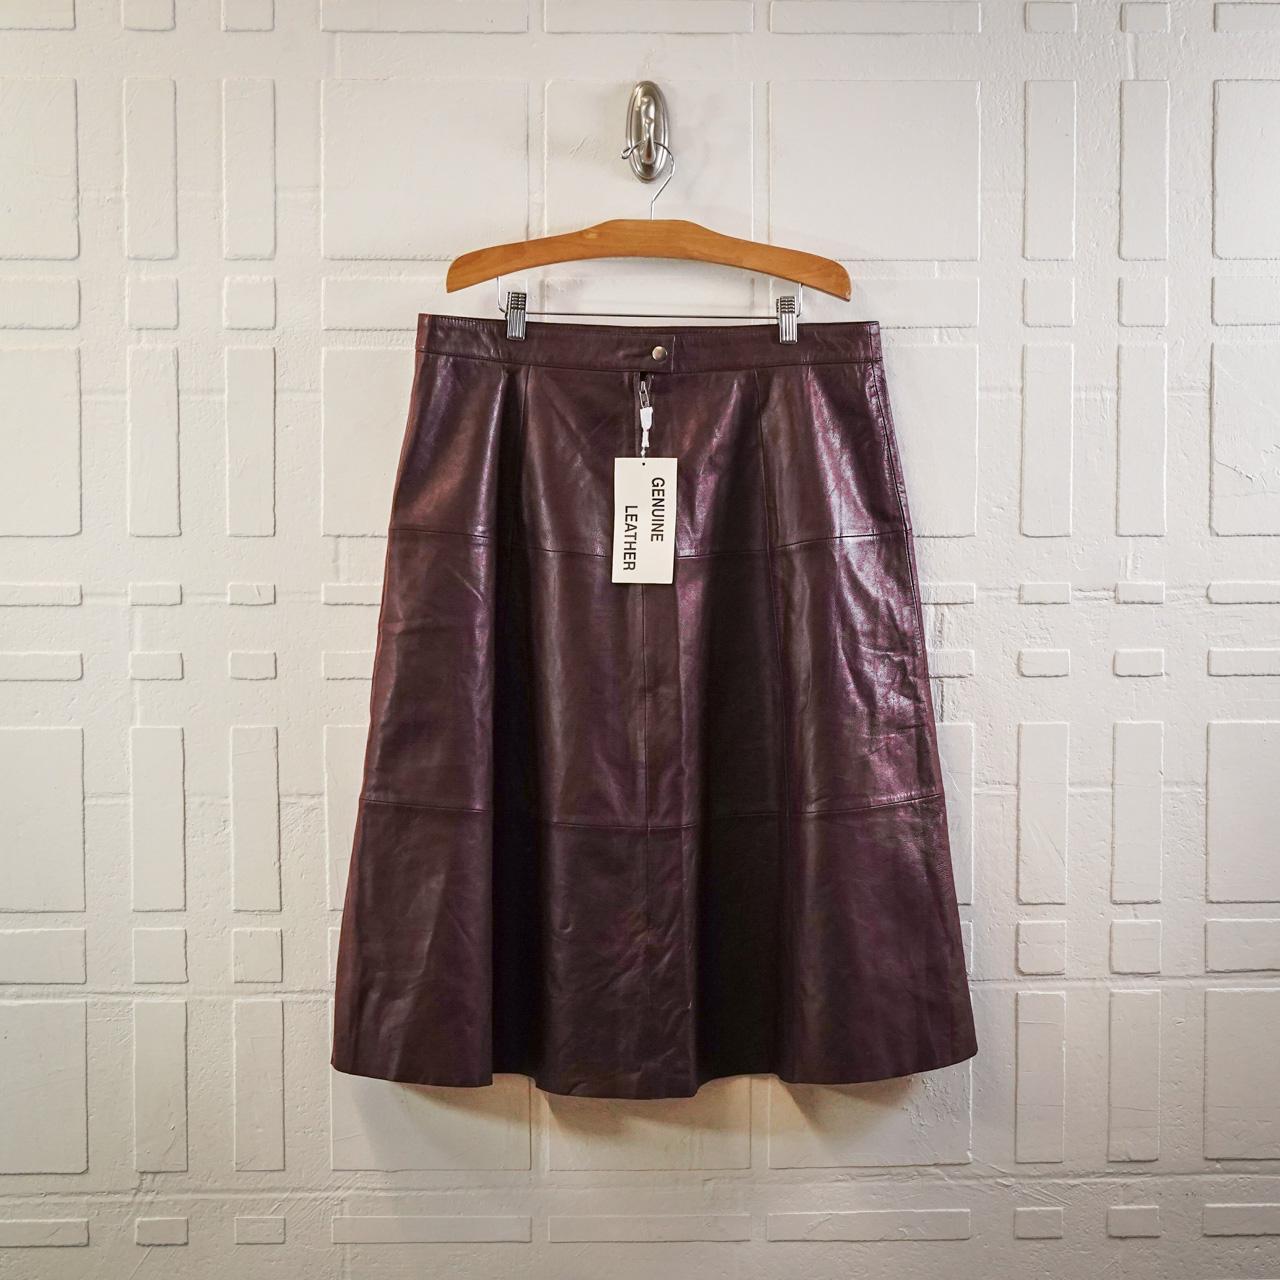 Product Image 2 - Jessica London Leather Ponte Skirt
*new